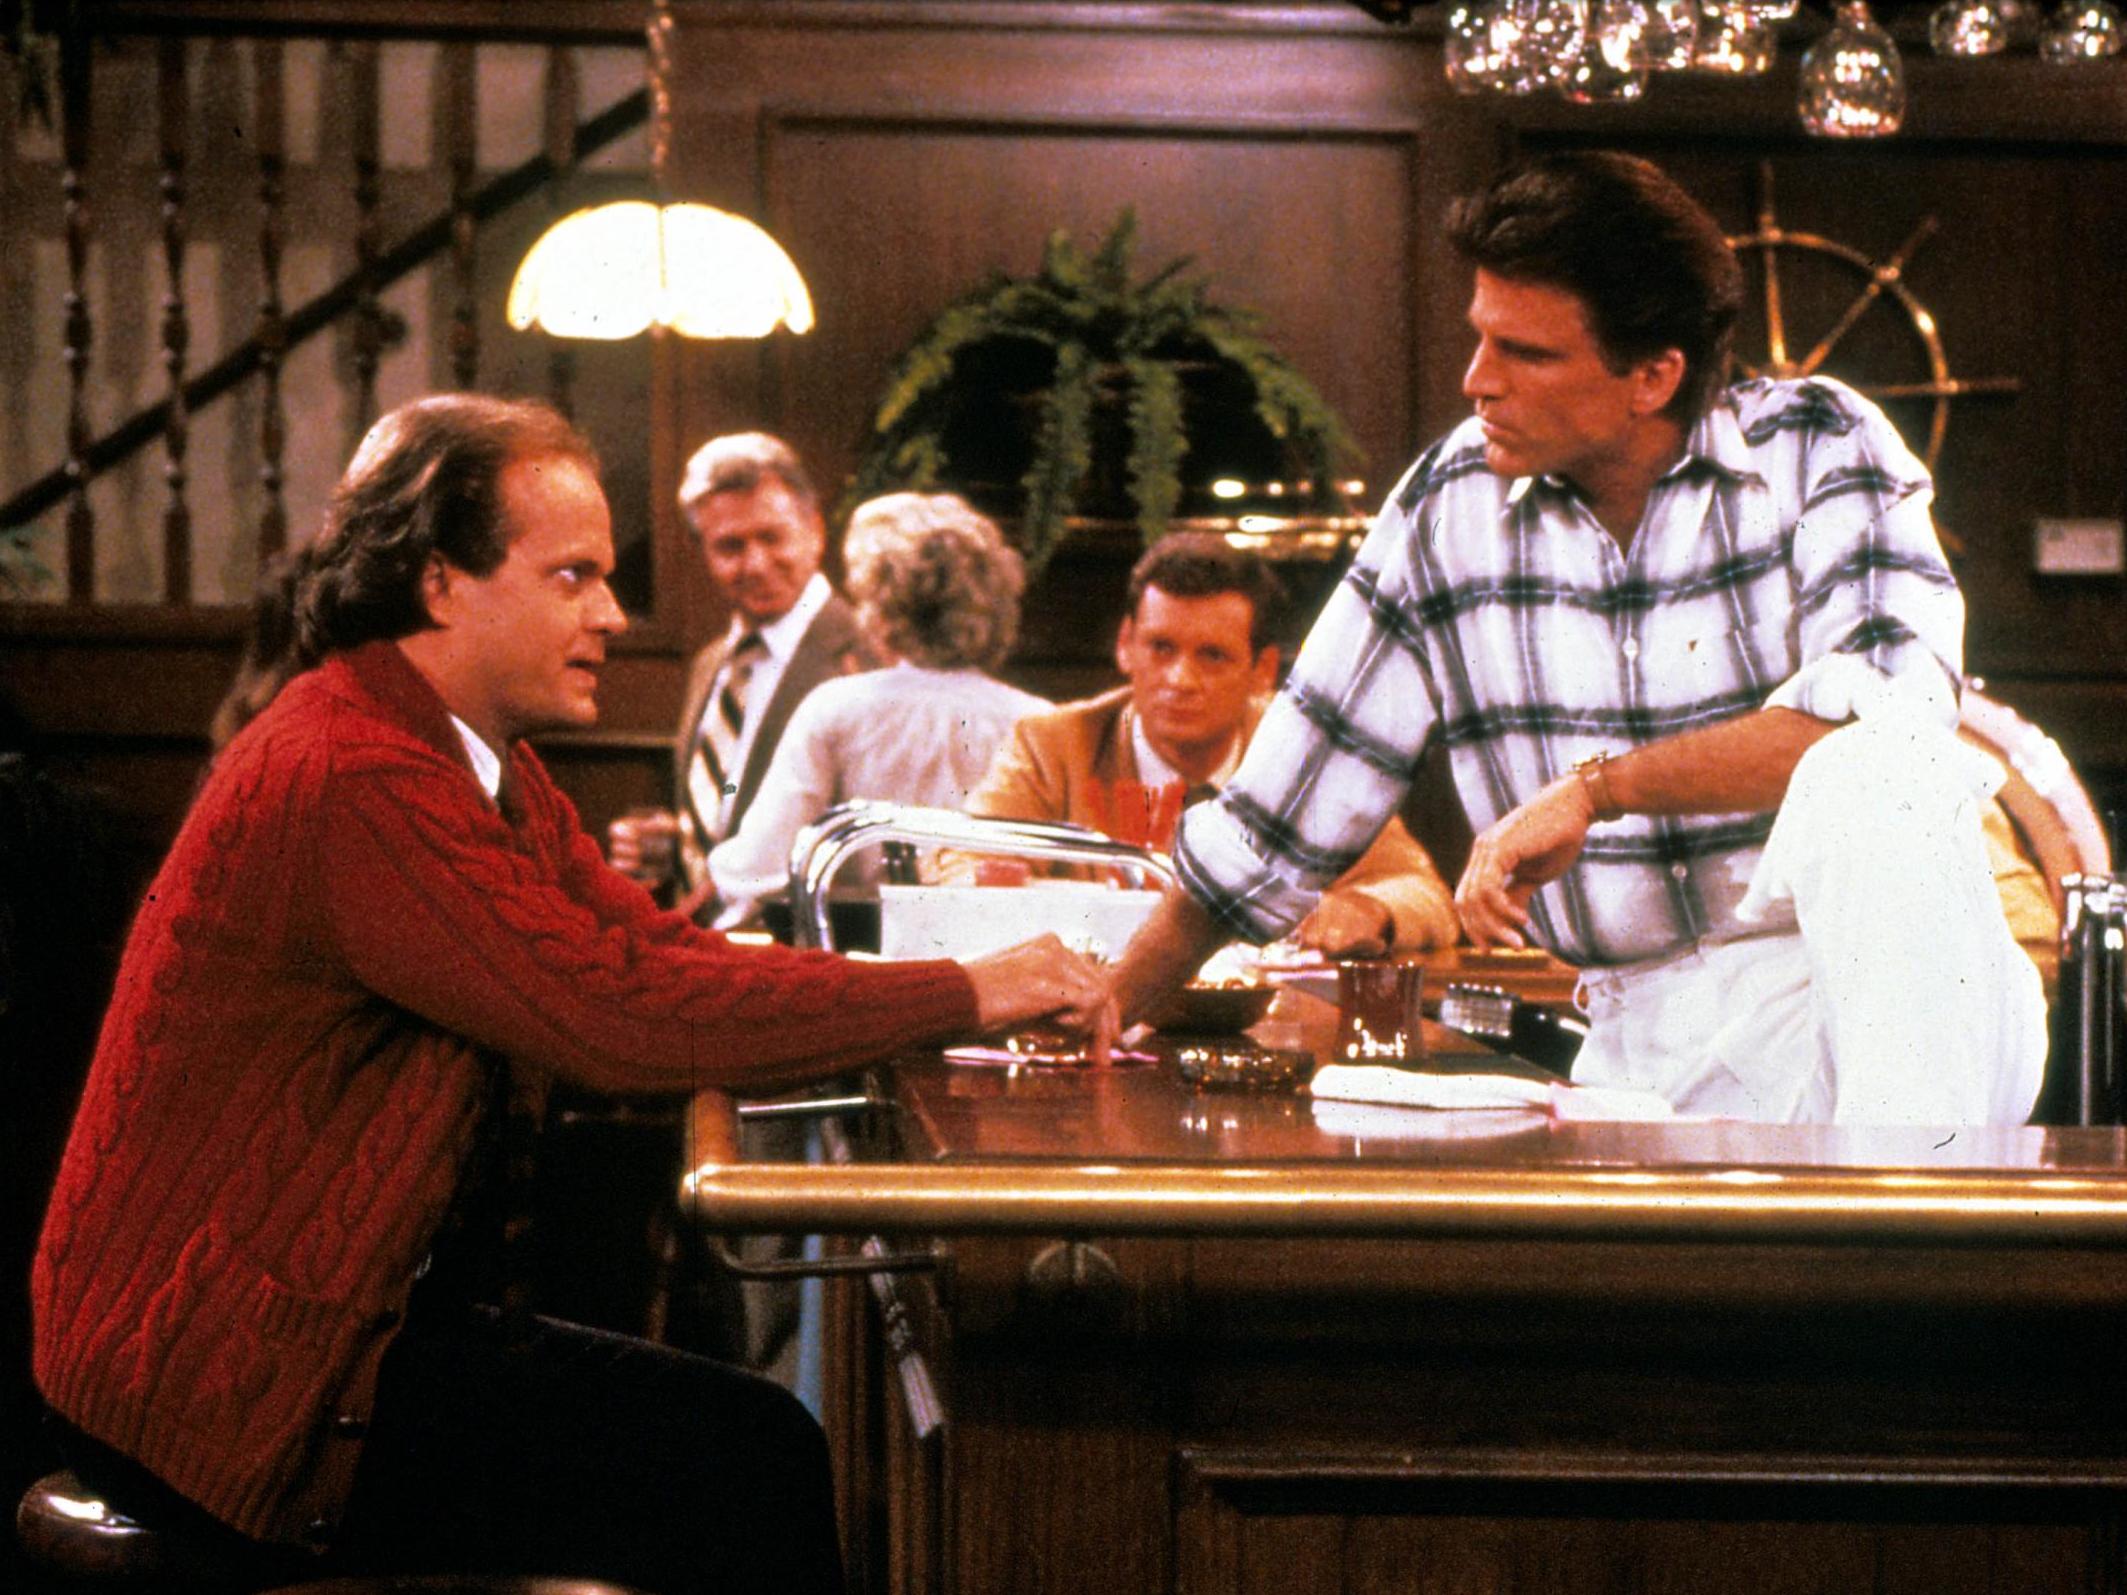 Kelsey Grammer has revealed that he hopes to persuade Ted Danson and Shelley Long to reprise their famous Cheers roles as Sam and Diane for the rebooted Frasier. Grammer as Frasier with Ted Danson as Sam in ‘Cheers’